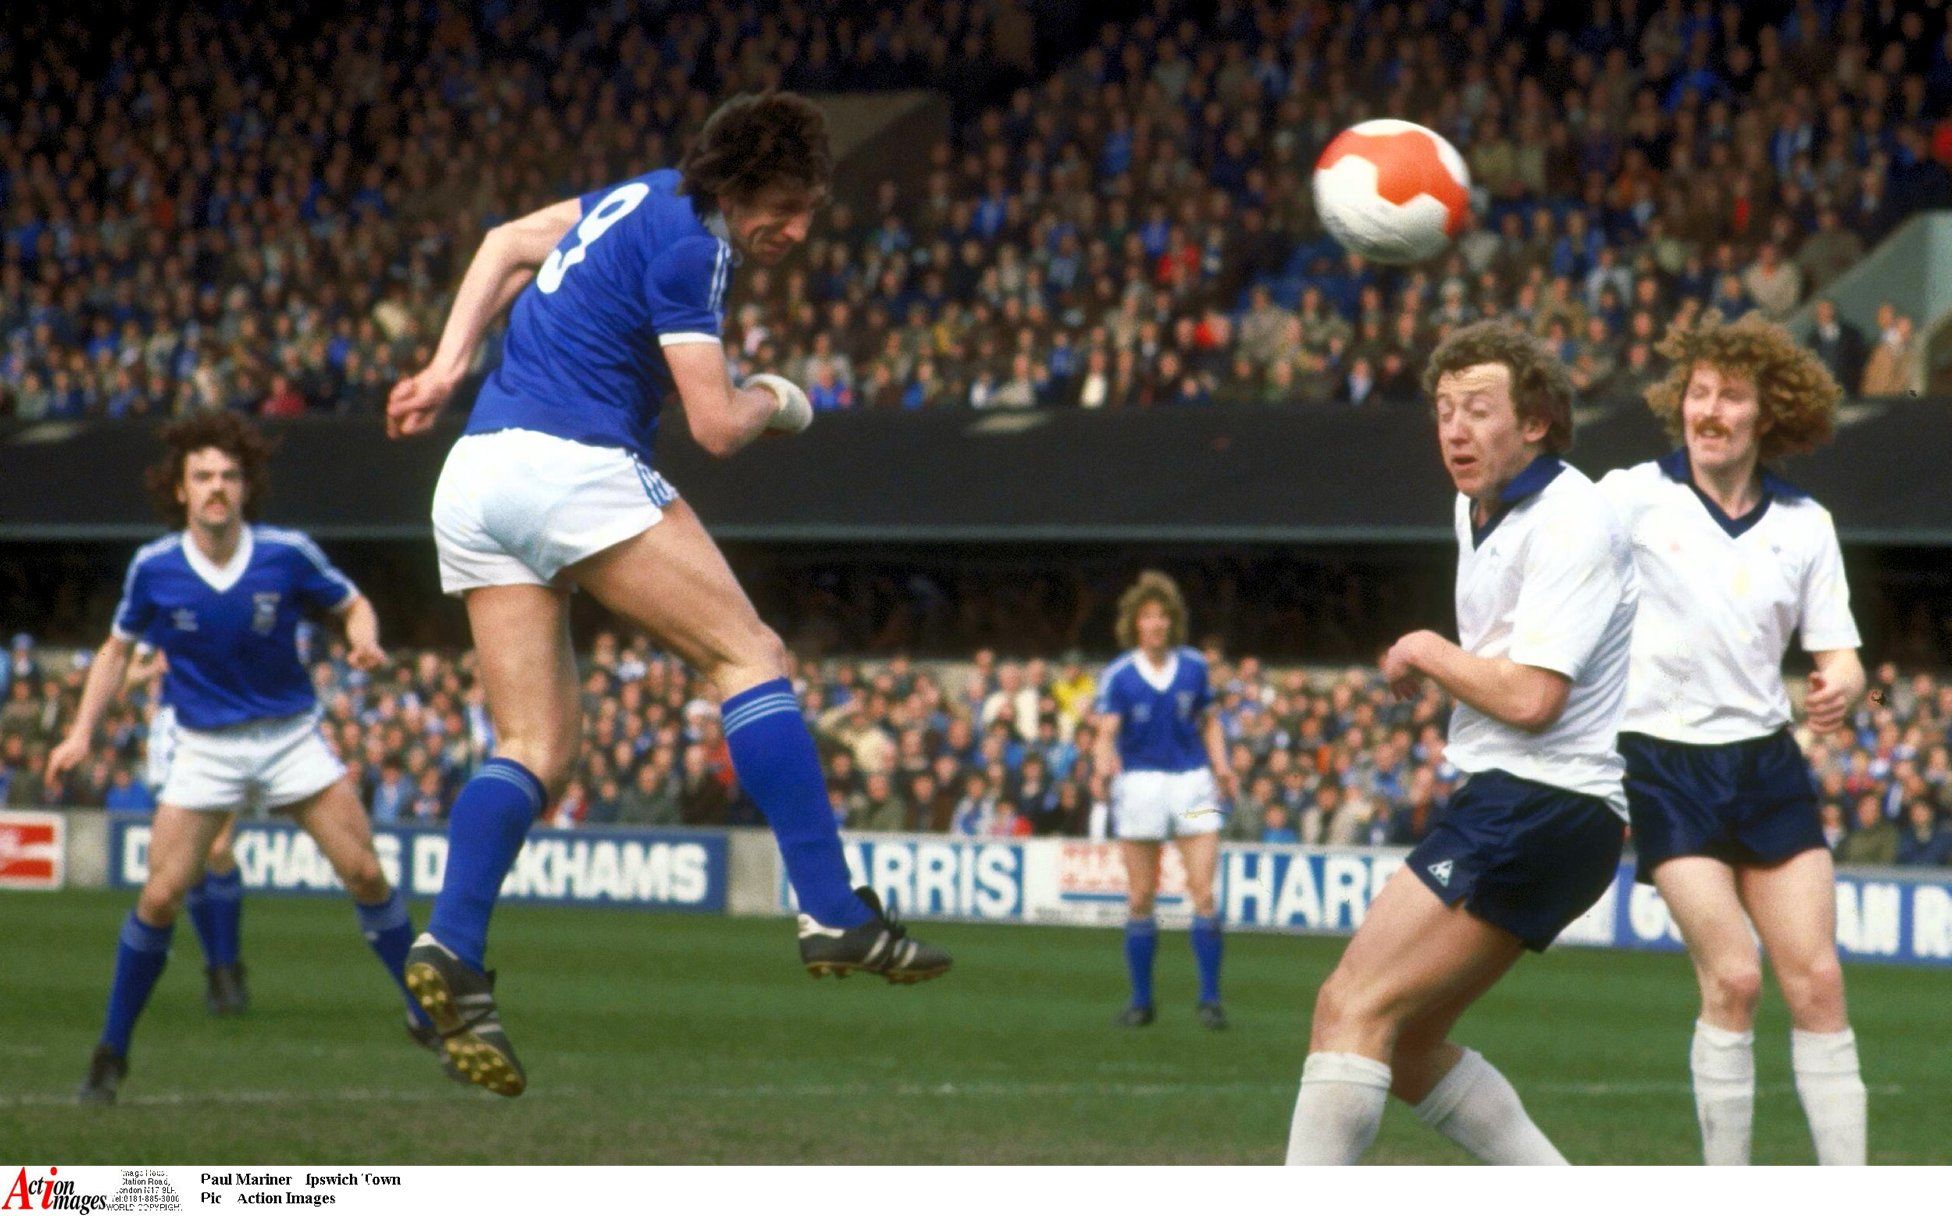 Paul Mariner - Ipswich Town  
Pic : Action Images